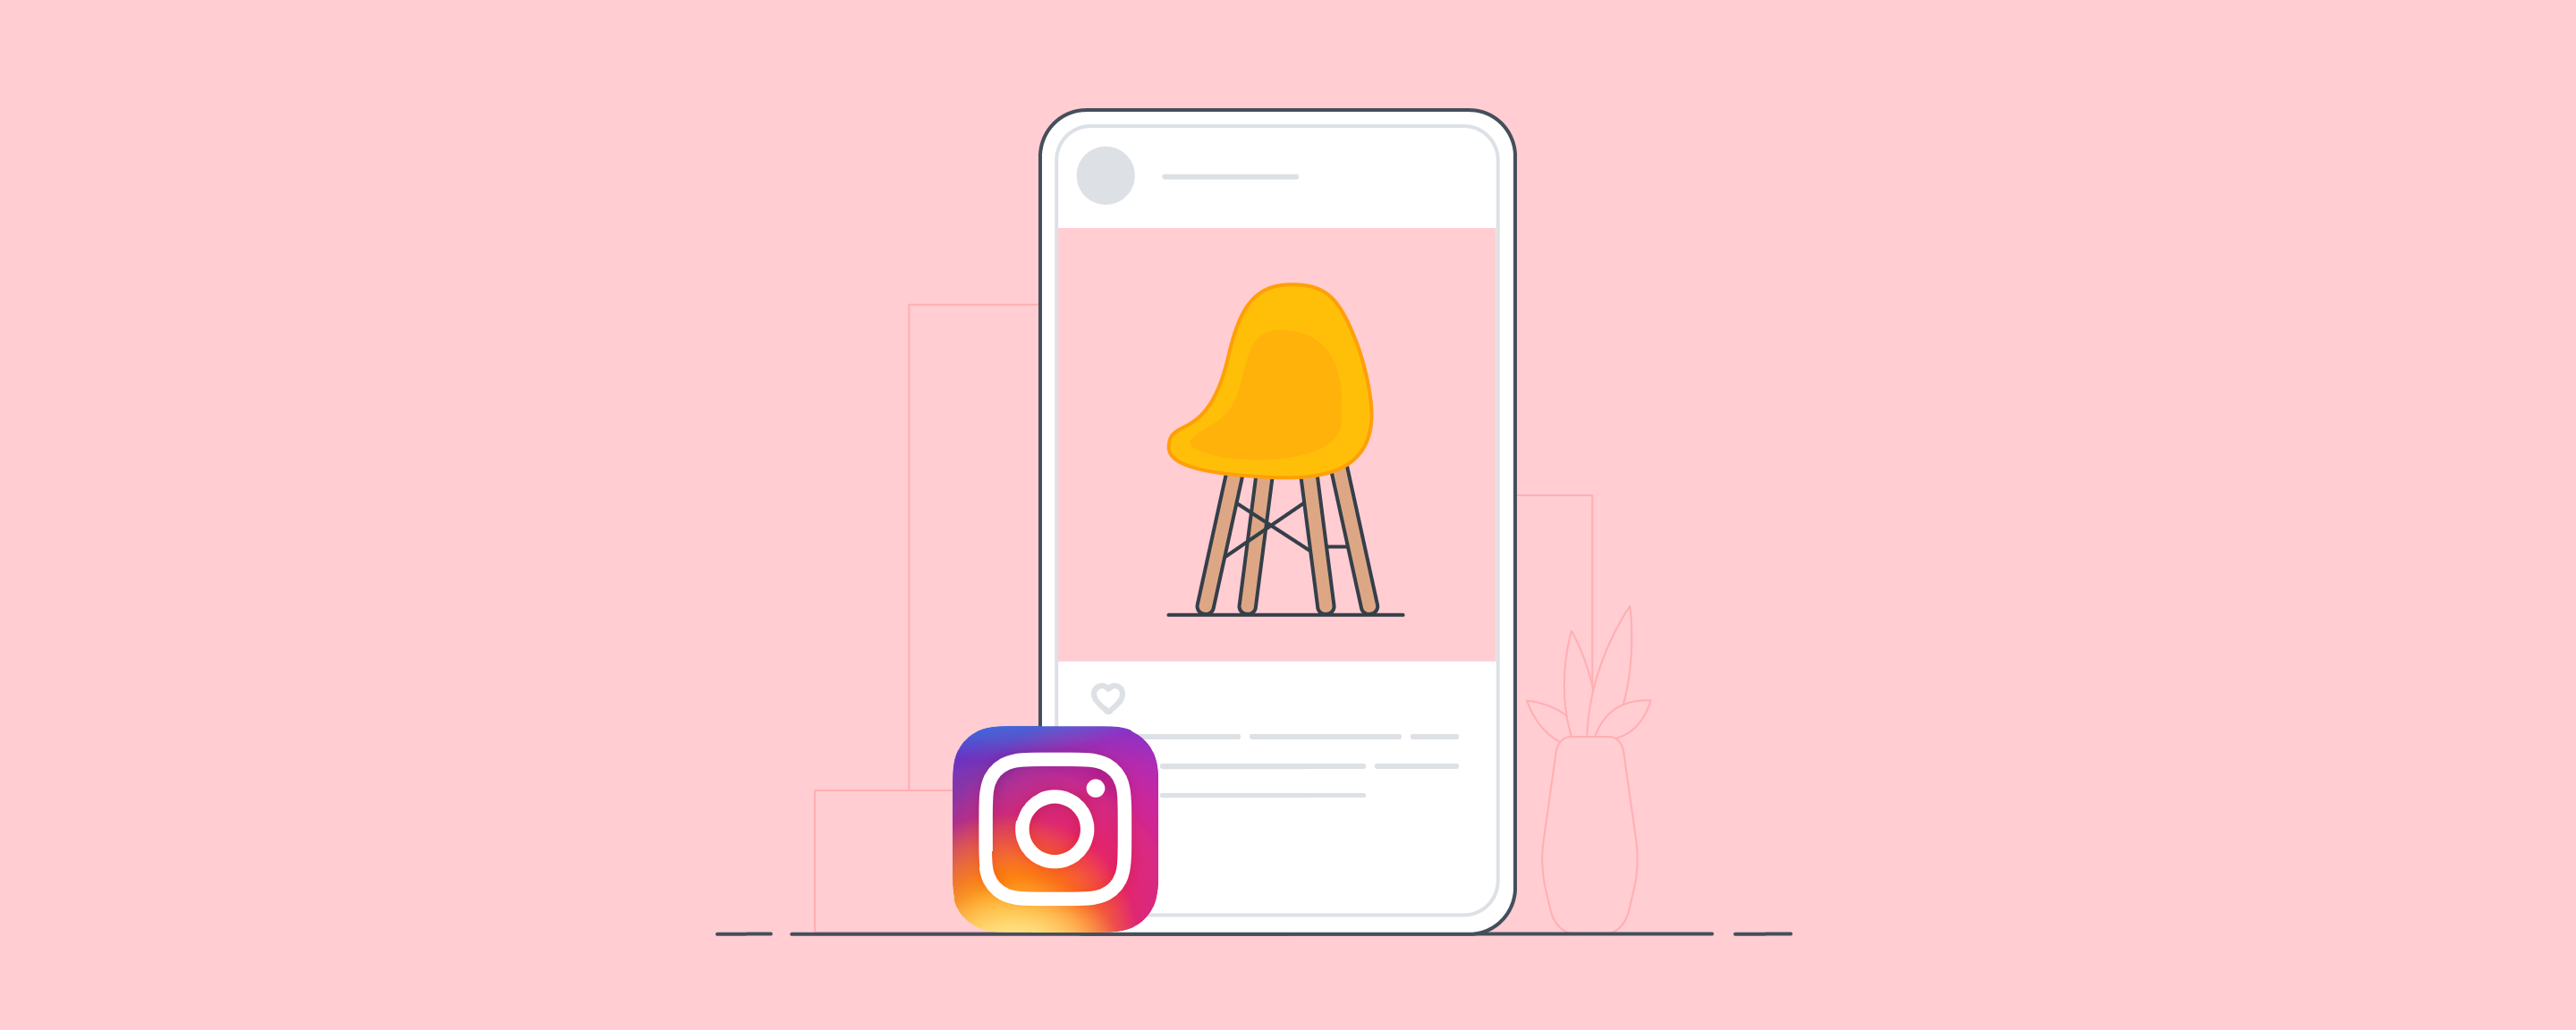 Instagram then we can become more famous among people. While creating an Instagram account,